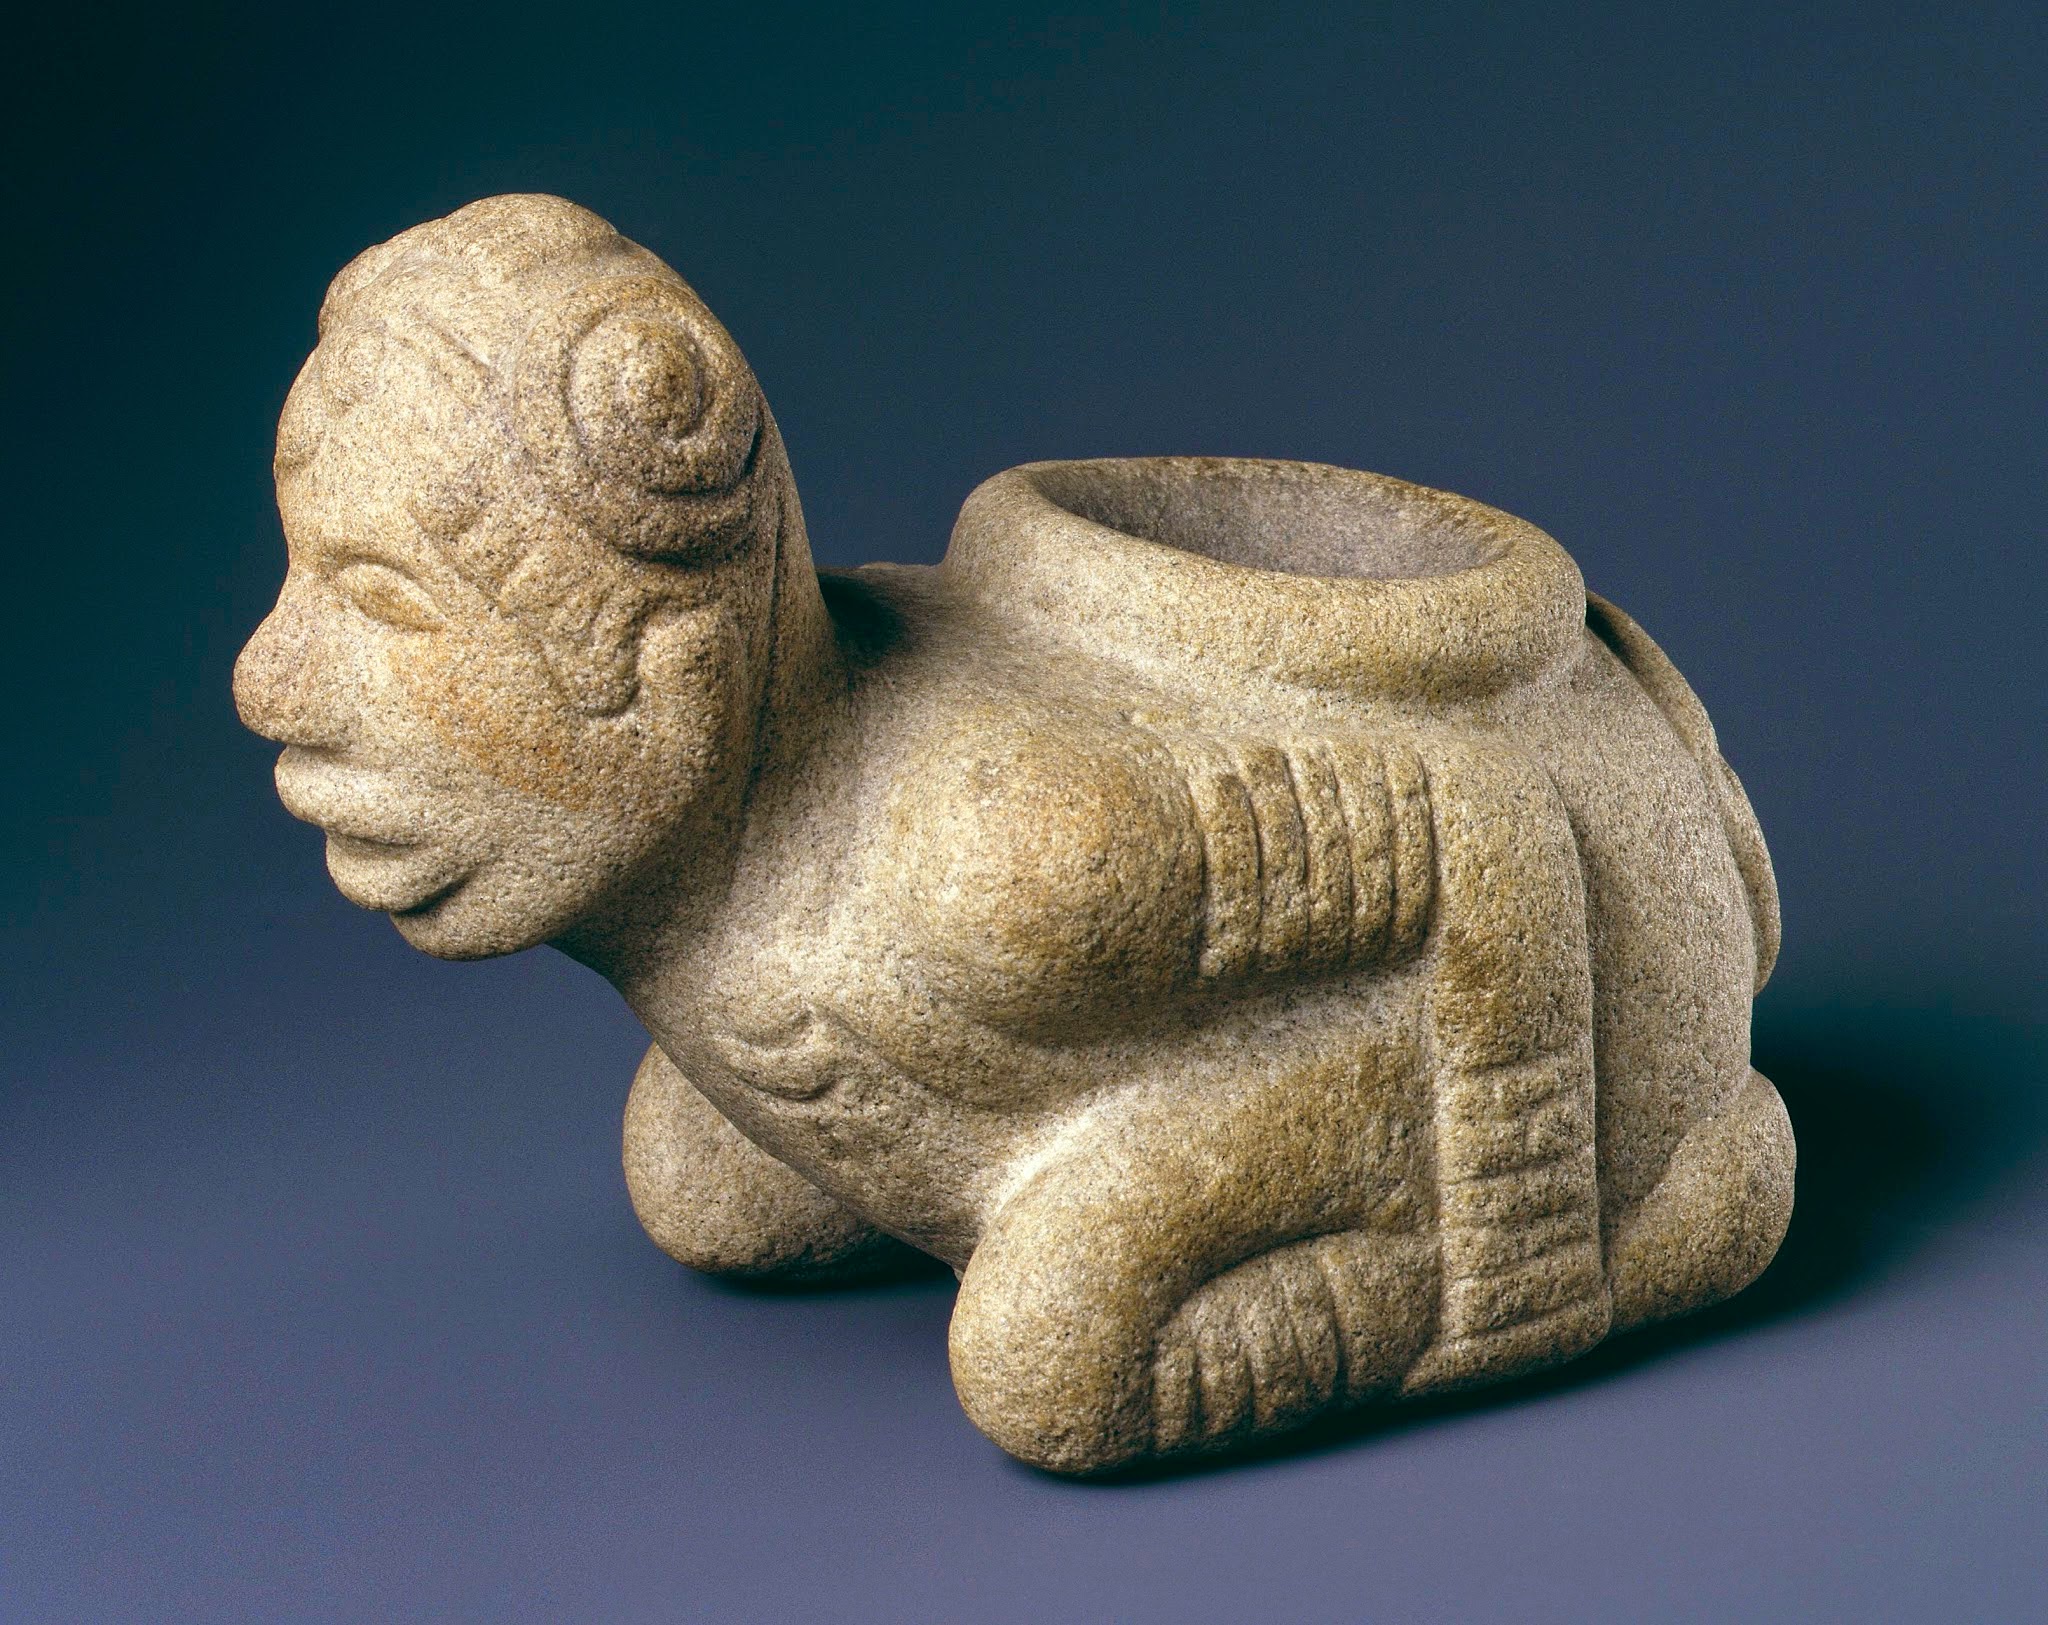  Mississippian Culture, from Tennessee or Georgia, Effigy Pipe in form of Bound Prisoner, 1400–1500. 